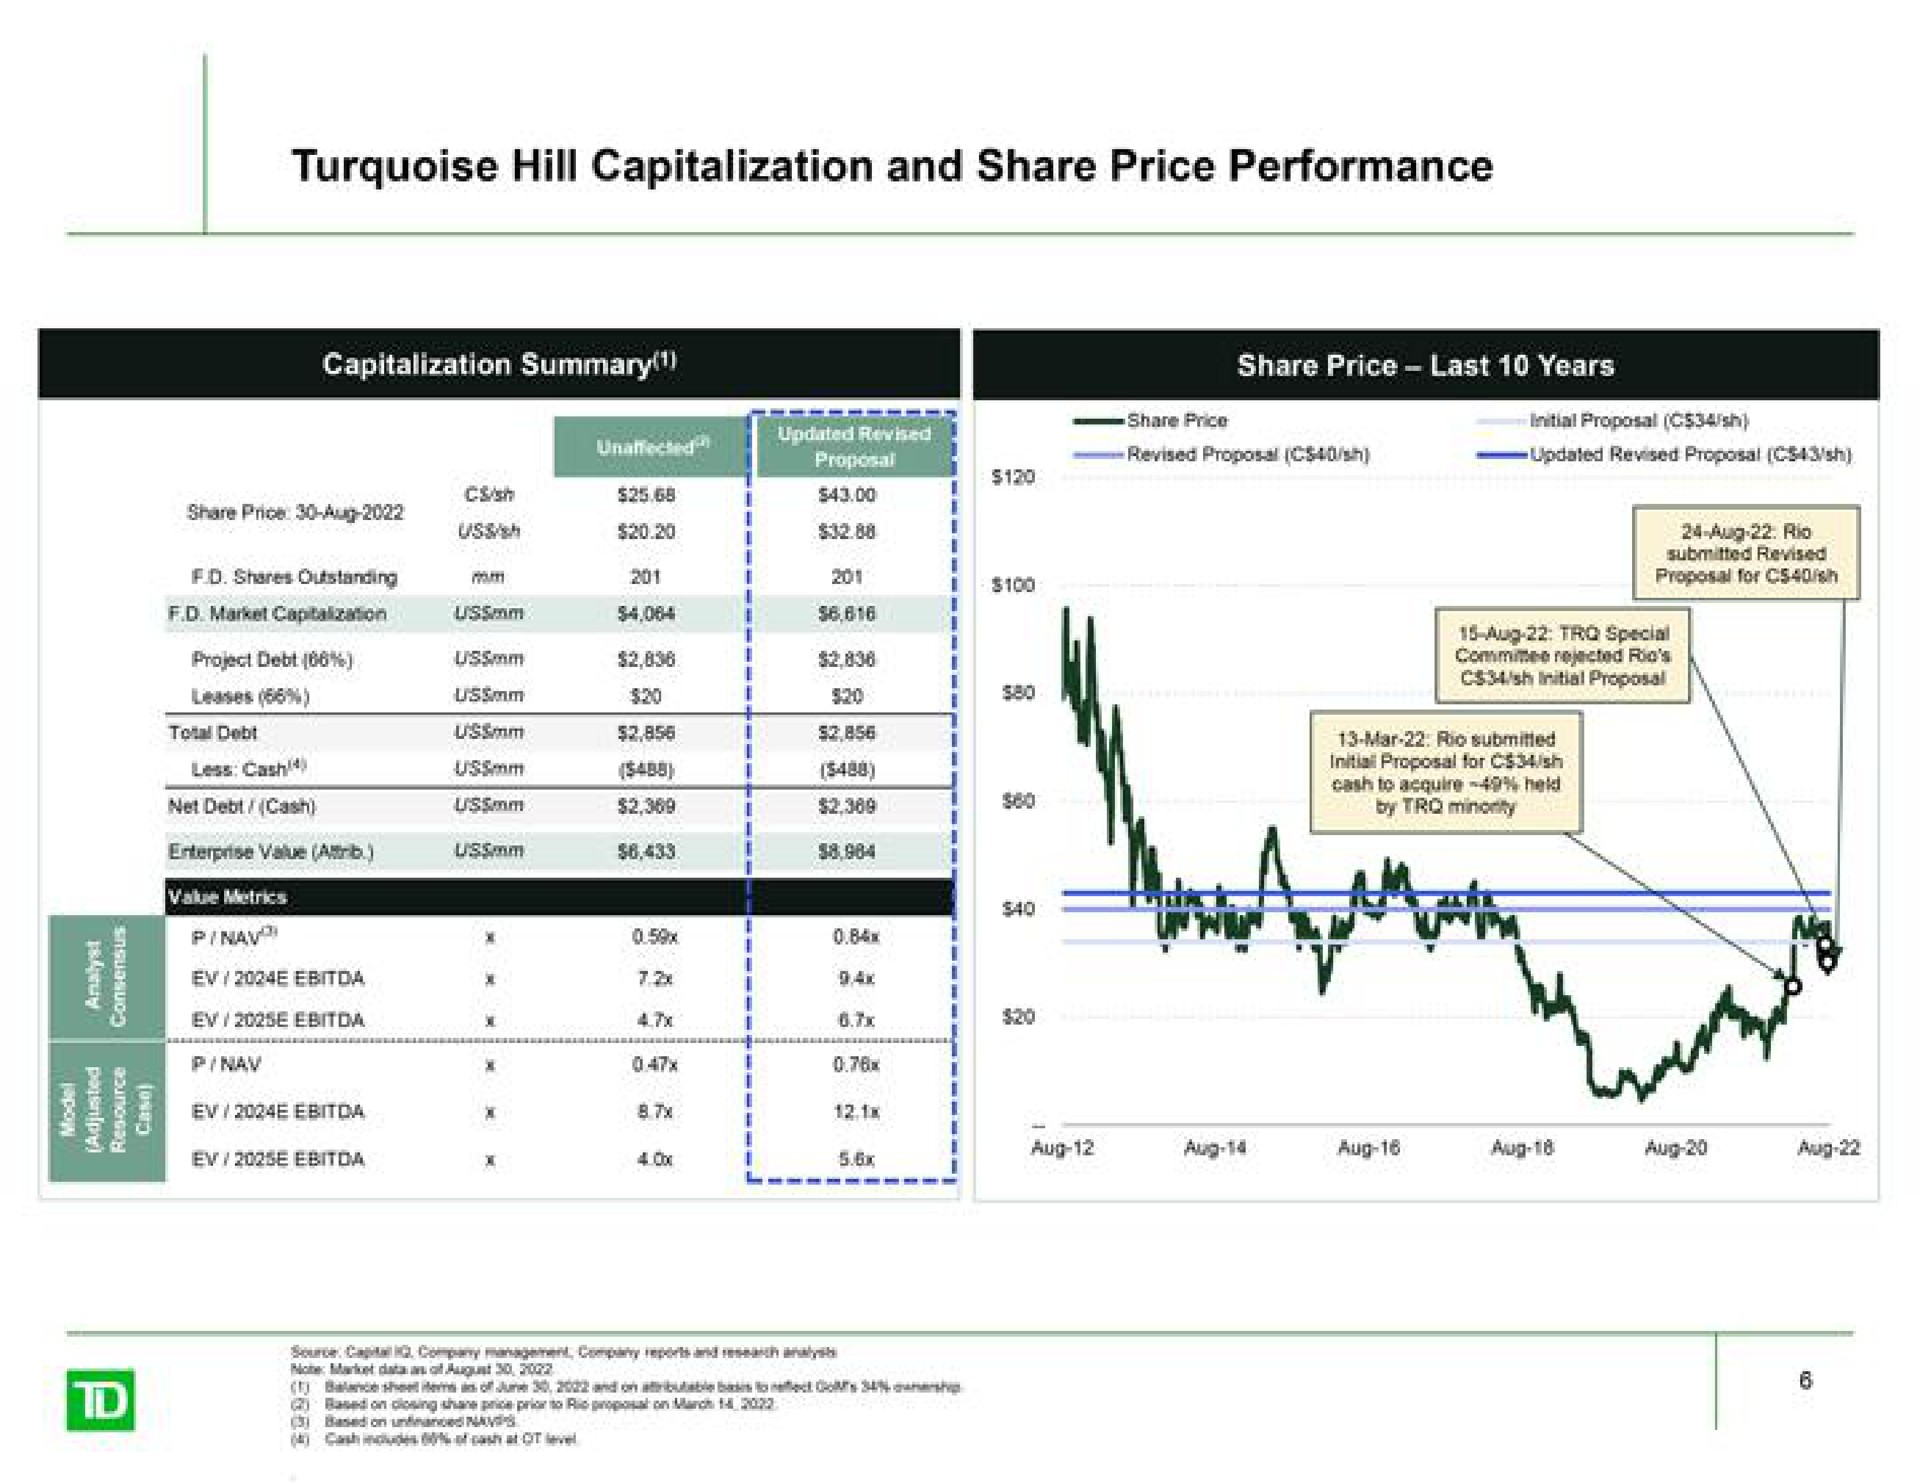 turquoise hill capitalization and share price performance | TD Securities